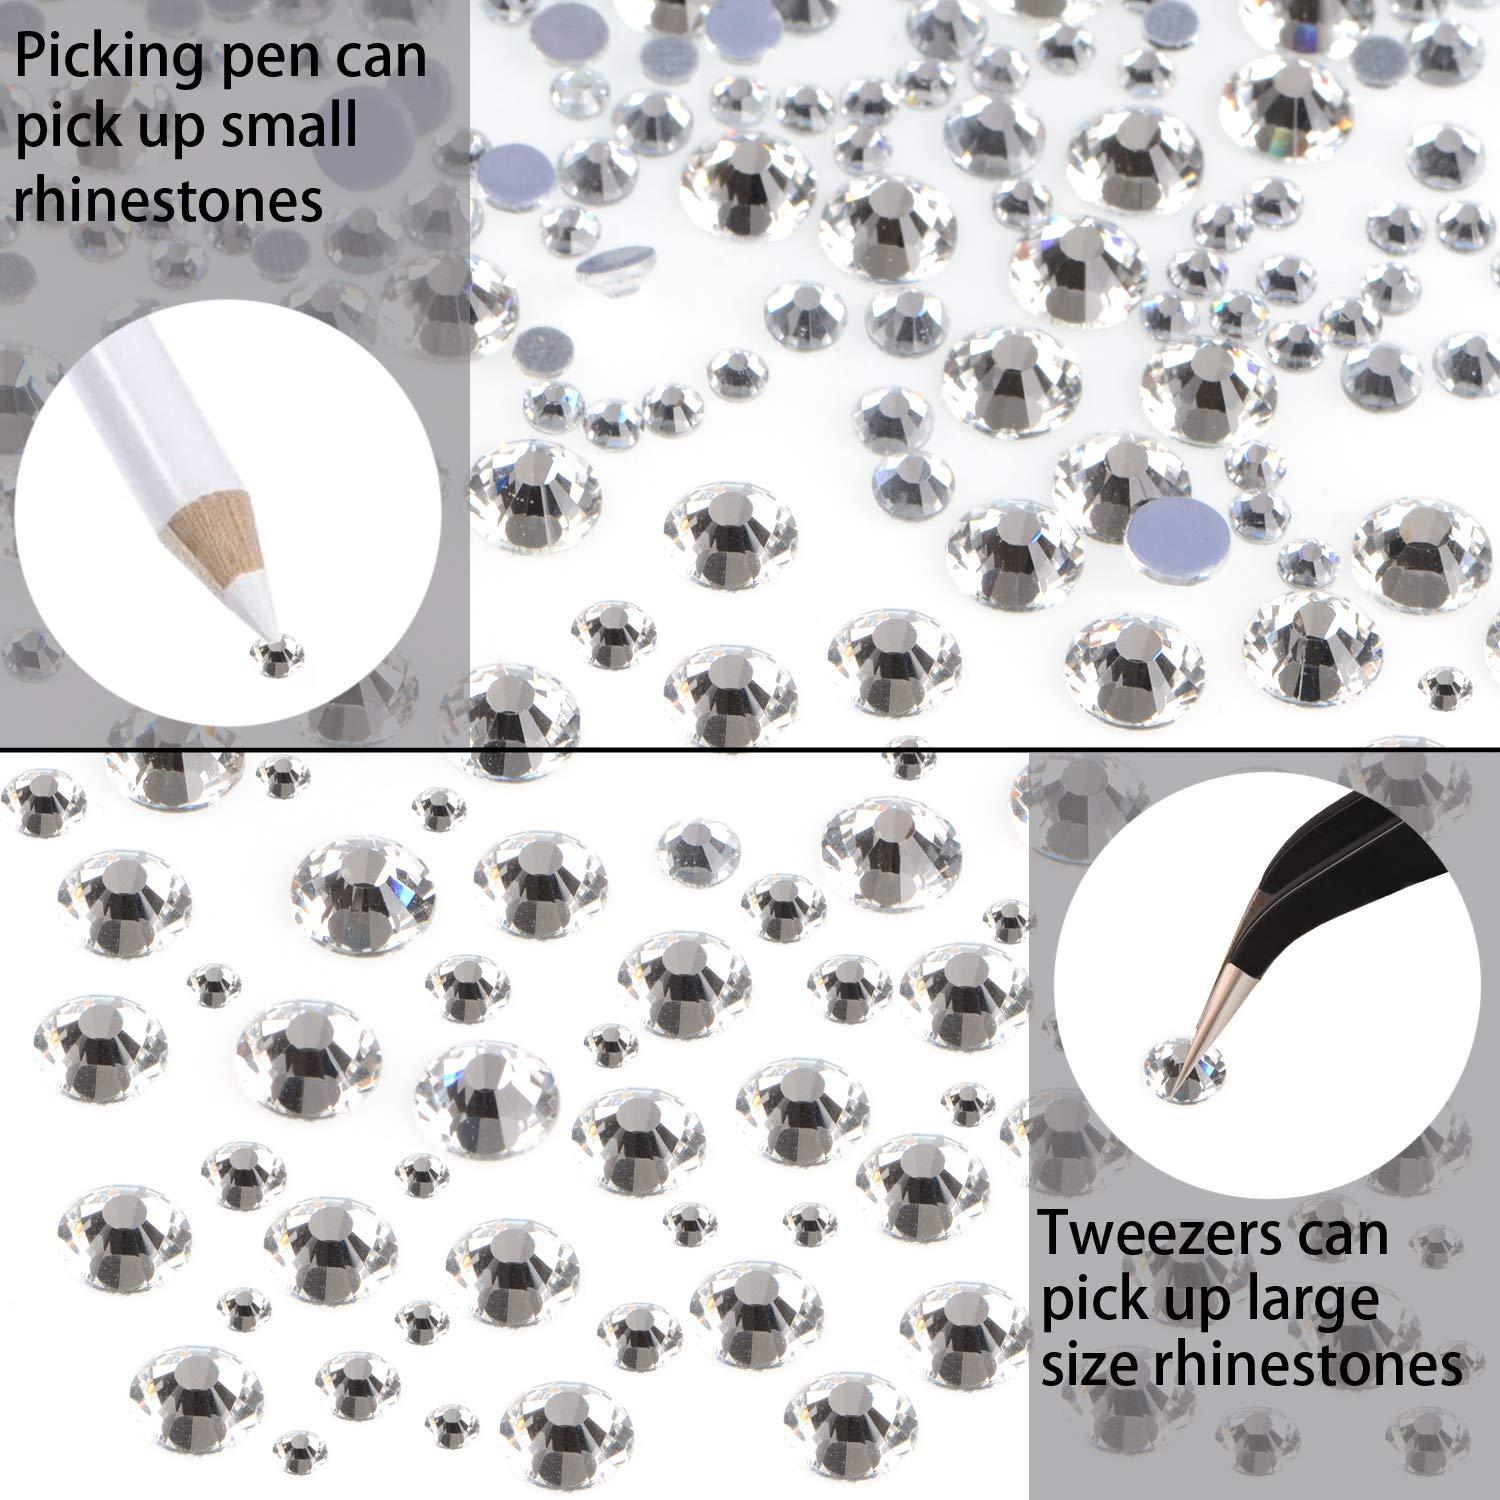 LPBeads 6400 Pieces Hotfix Rhinestones Clear Flat Back 5 Mixed Sizes  Crystal Round Glass Gems with